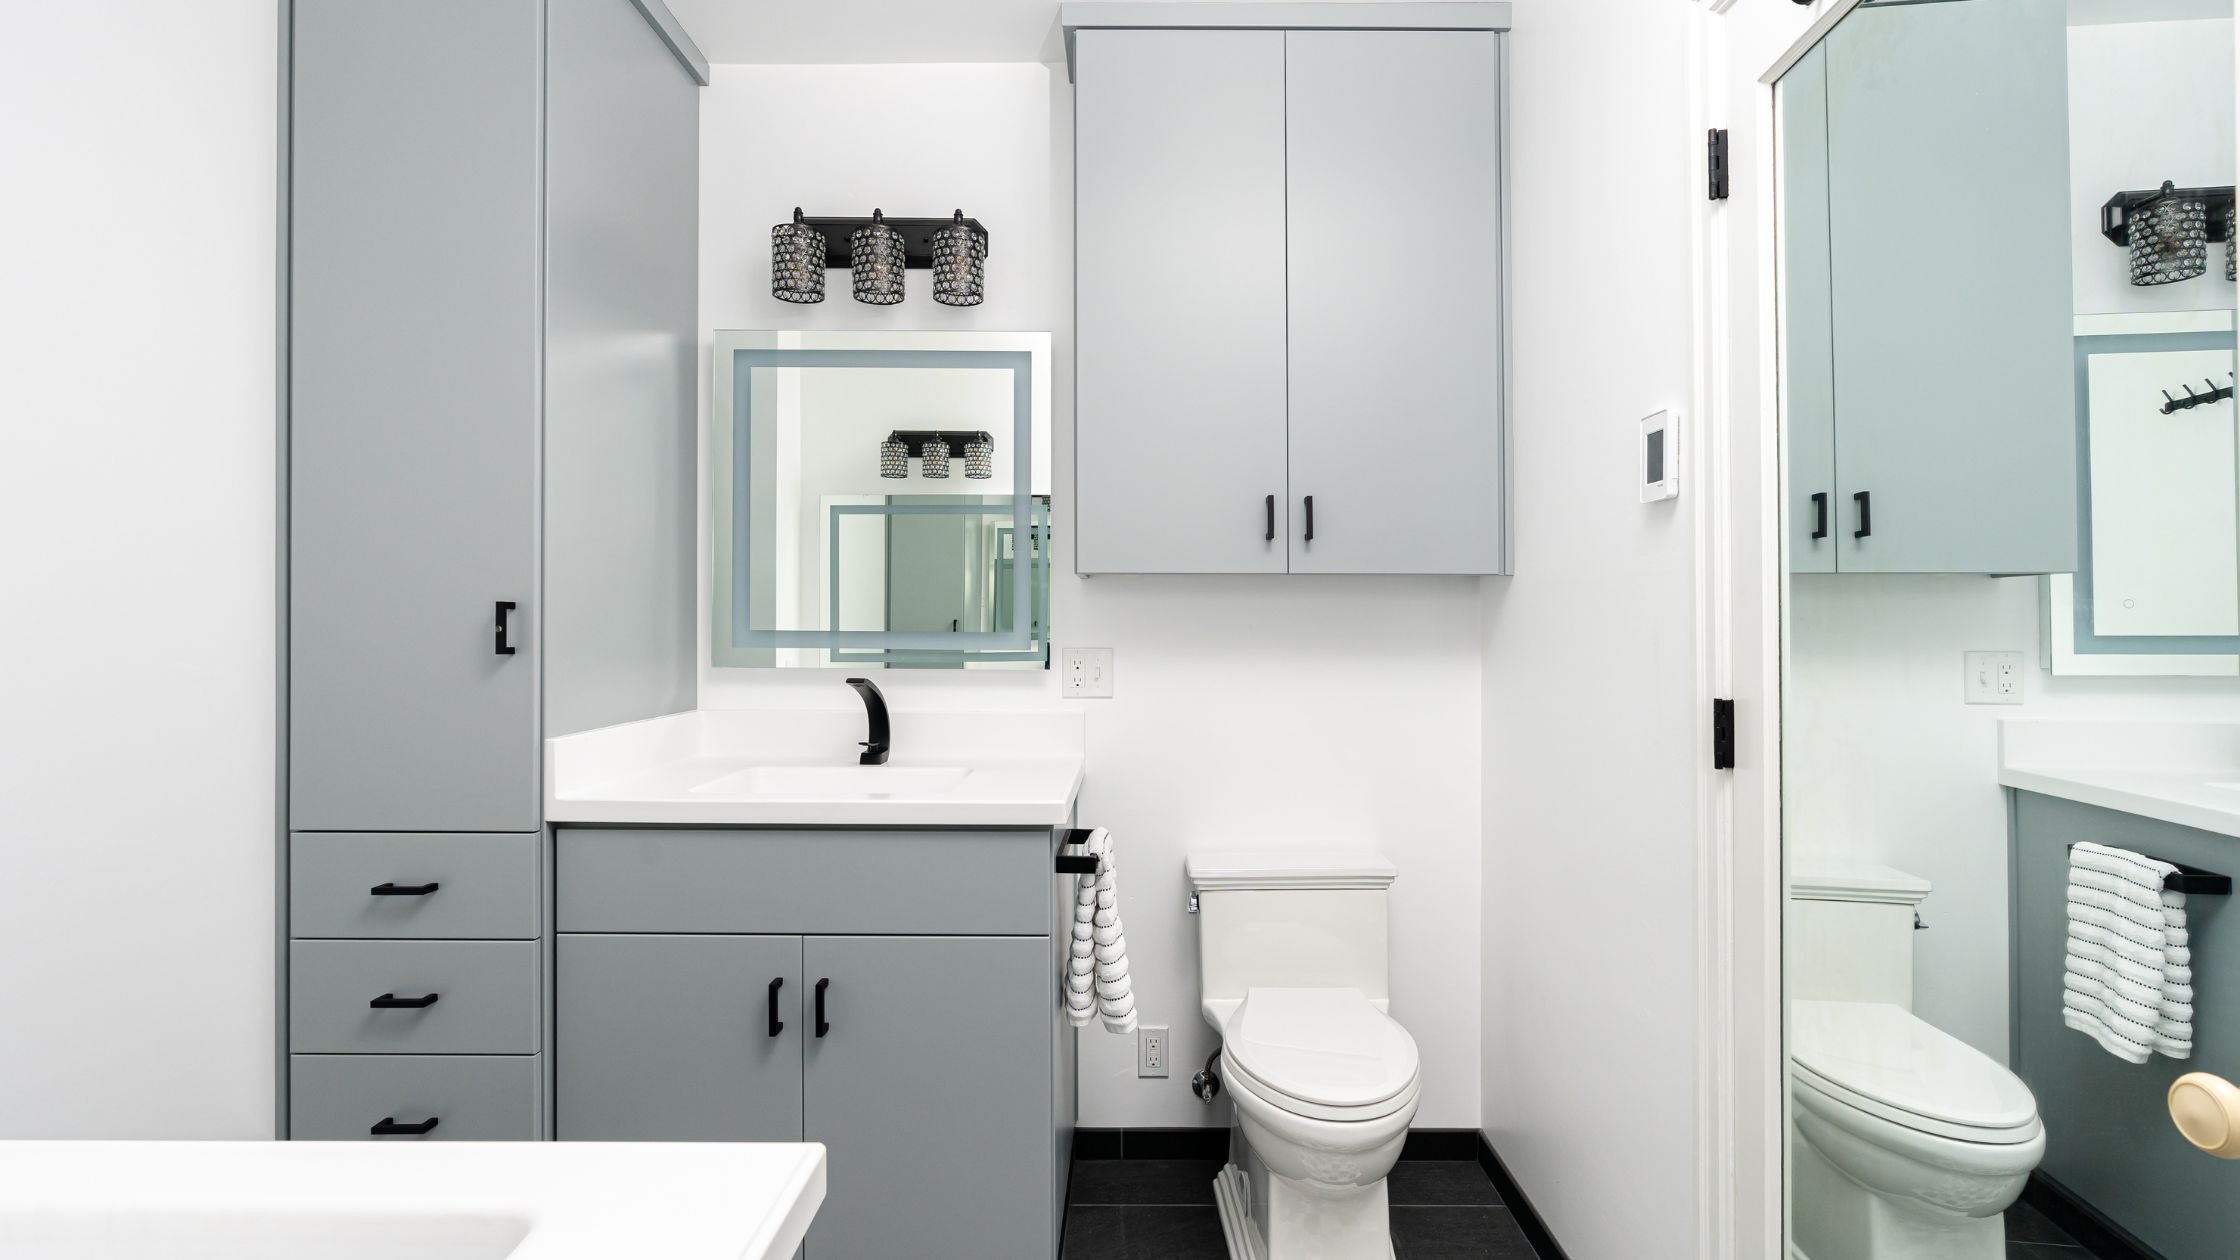 How Long Does It Take to Remodel a Bathroom?